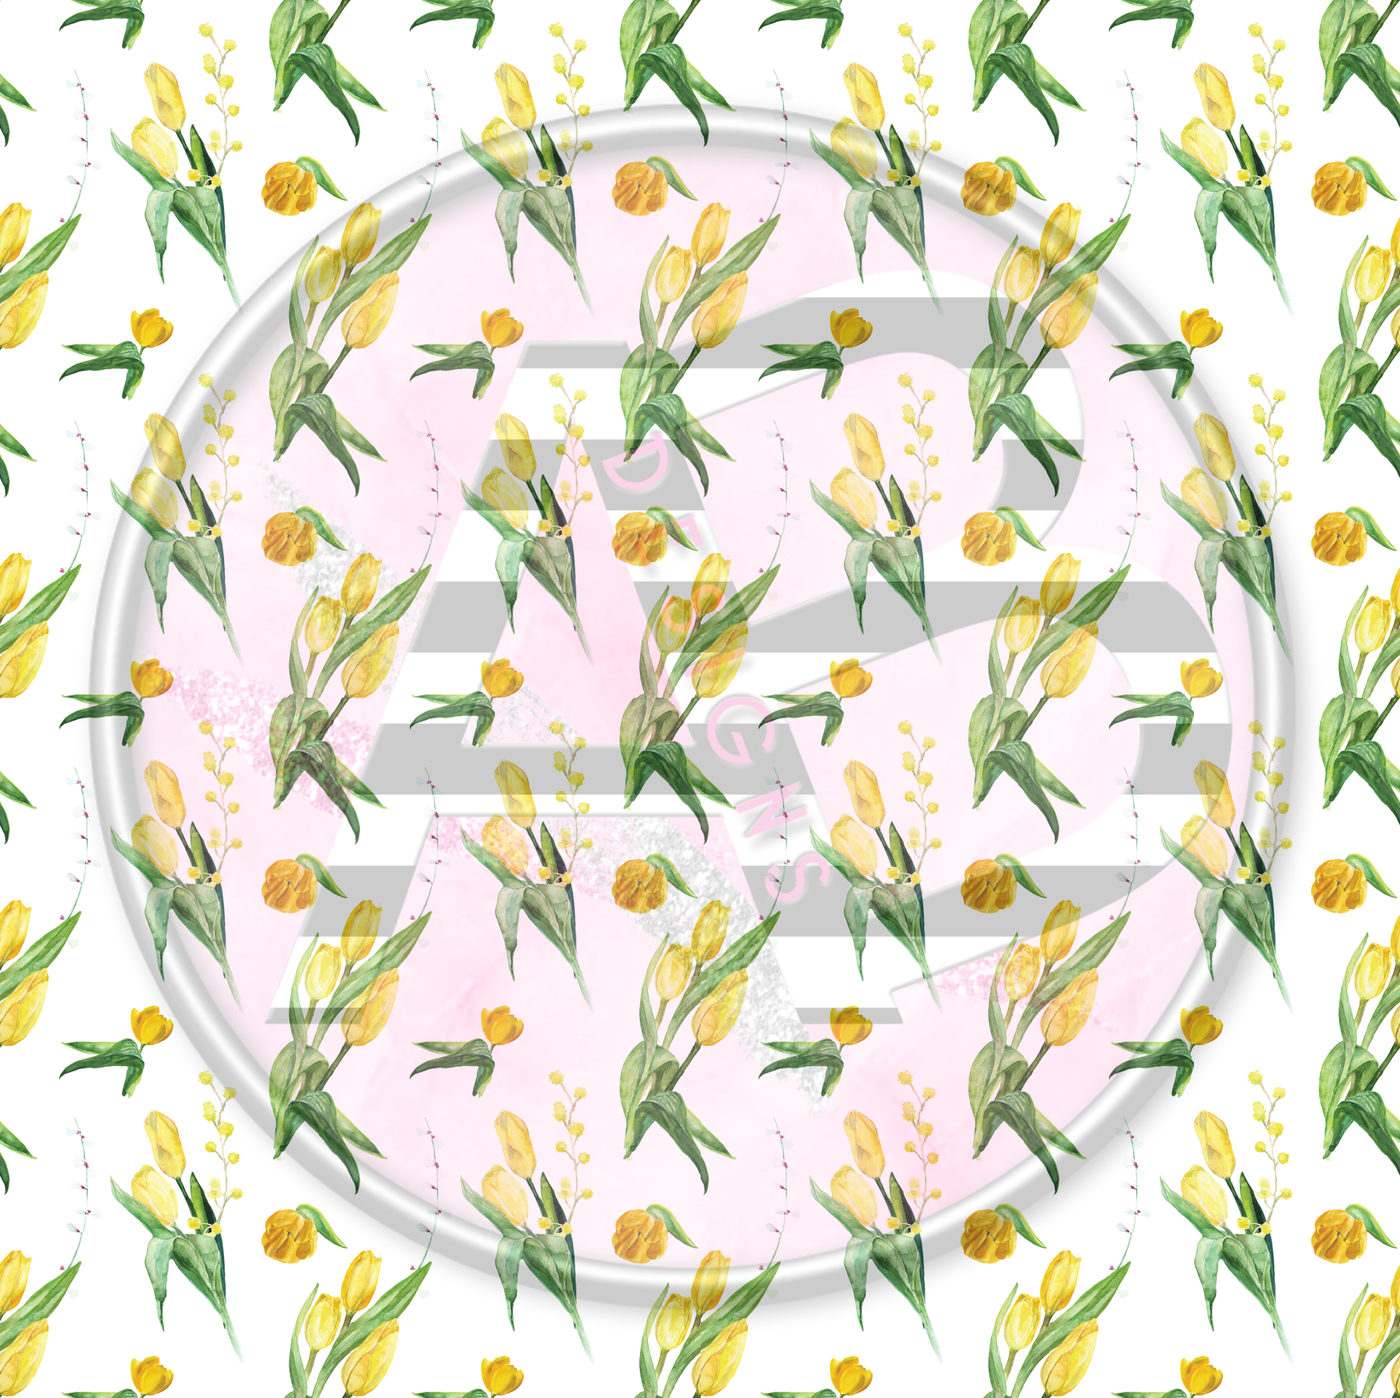 Adhesive Patterned Vinyl - Tulips 04 Smaller